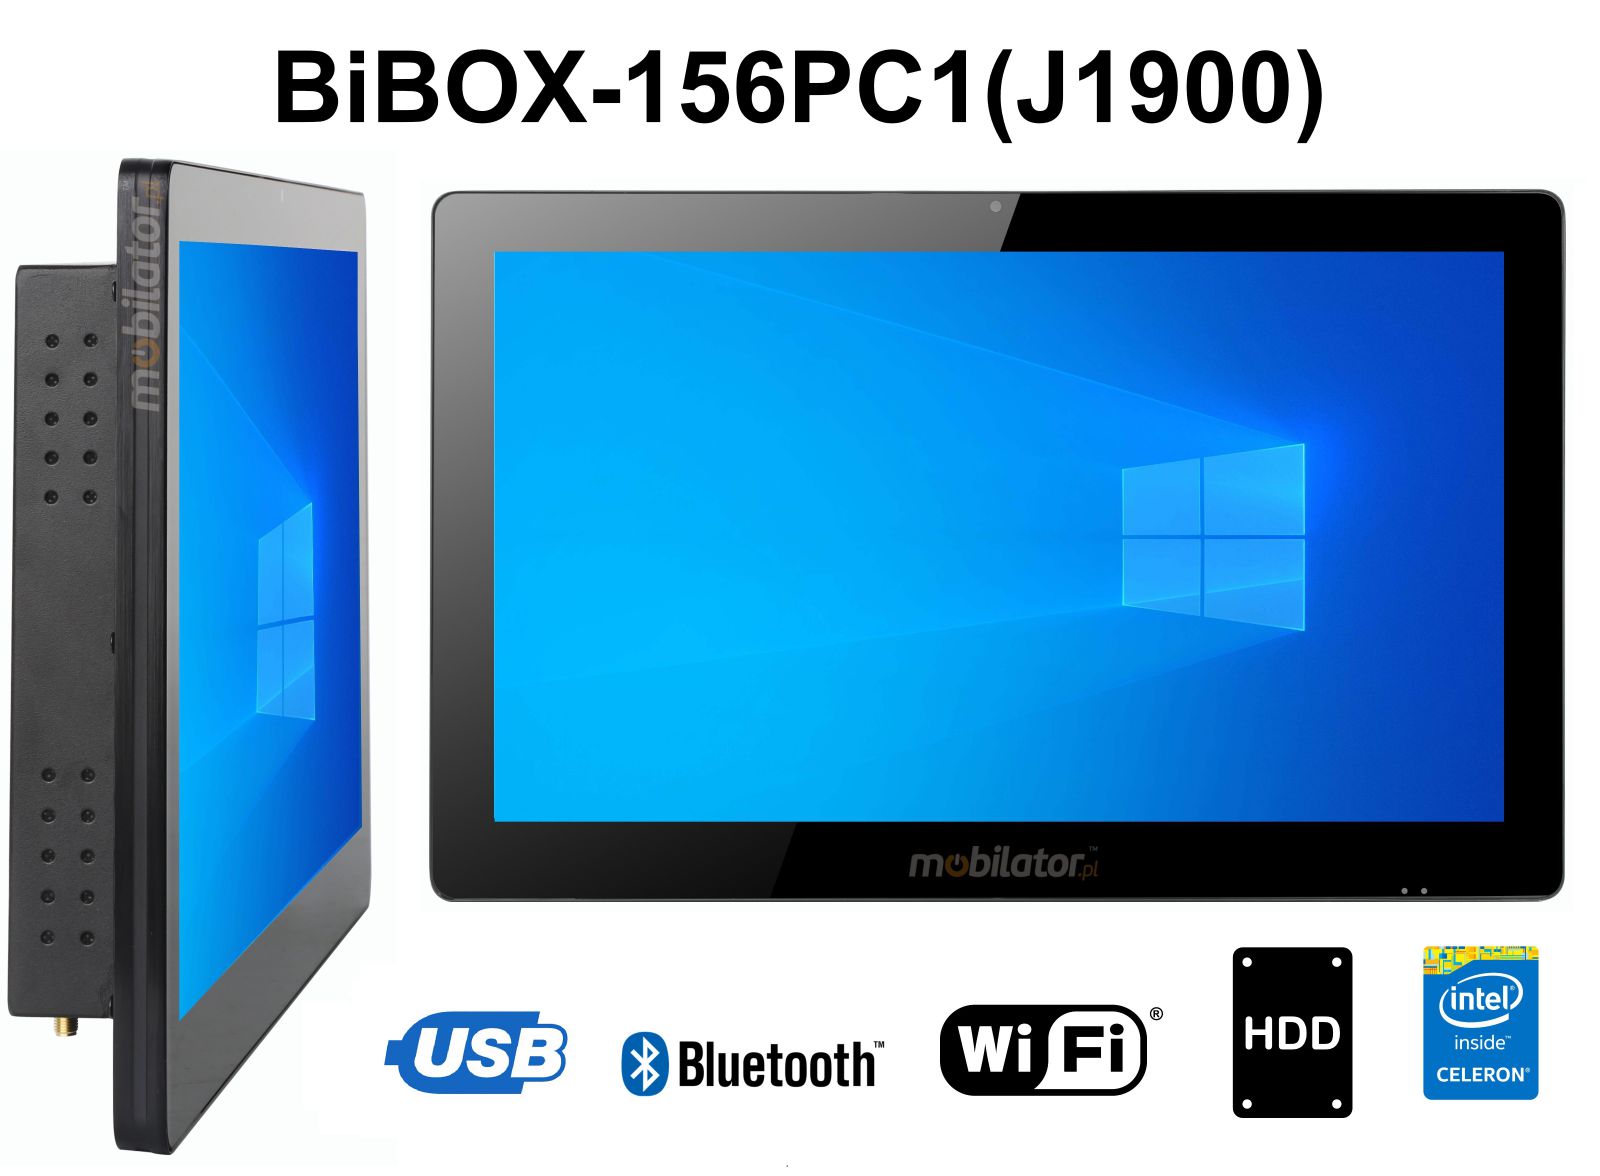 BiBOX-156PC1- Industrial panel computer with Wifi and IP65 resistance standard for screen (1xLAN, 6xUSB)